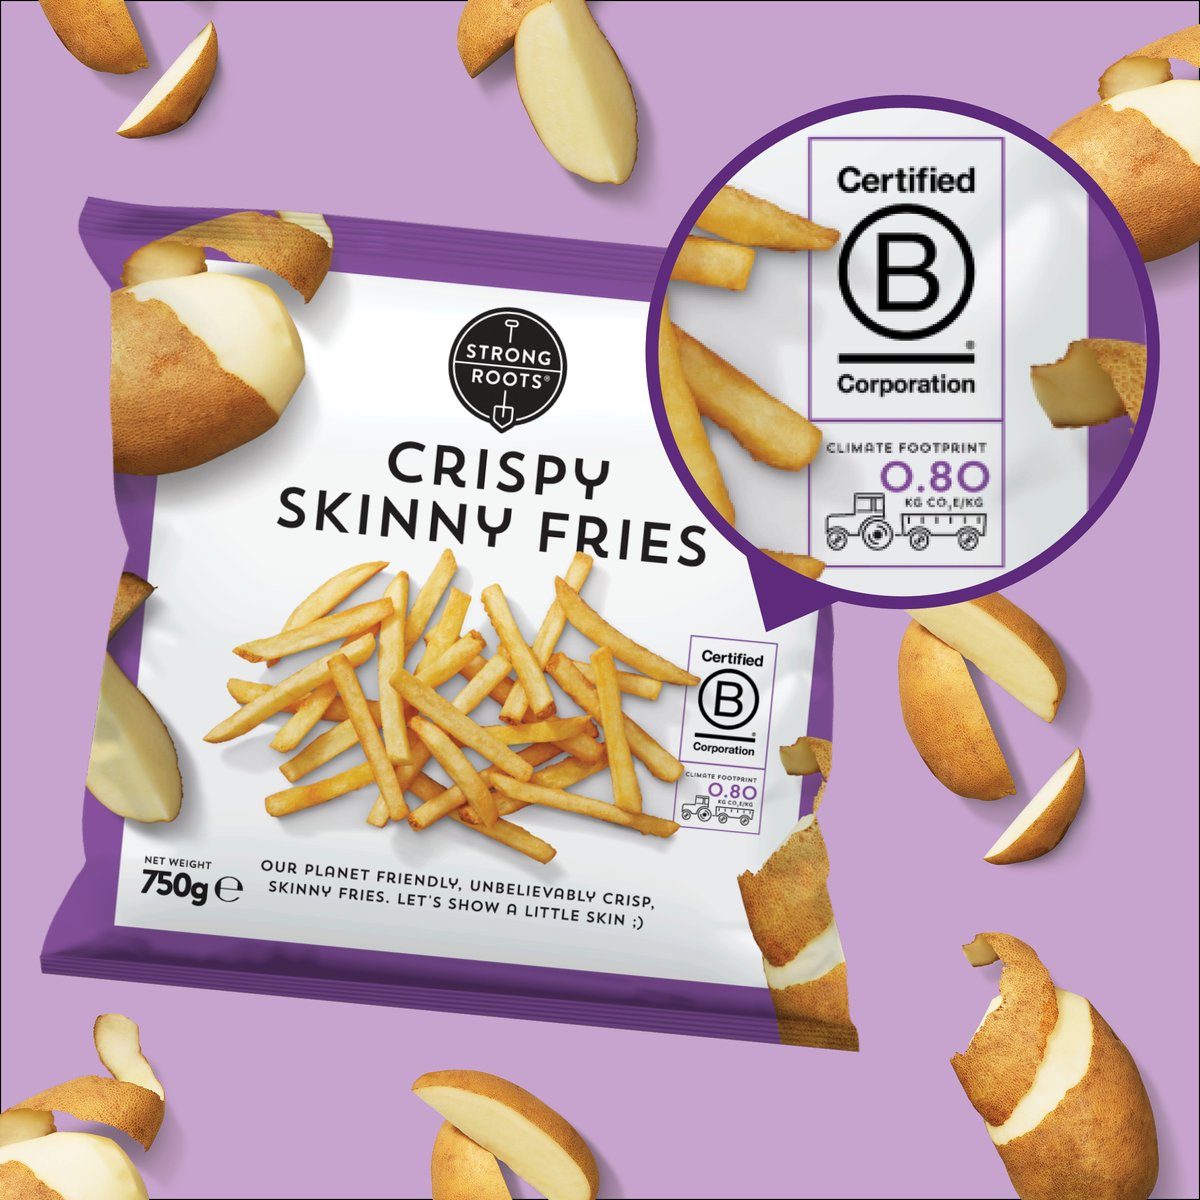 Have you ever spotted the 0.80 on our Crispy Skinny Fries packaging? It’s the evaluation of our climate impact from soil to shelf, as verified by an independent third-party. We believe in transparency, so you can feel good about the environmental impact of the food you enjoy!